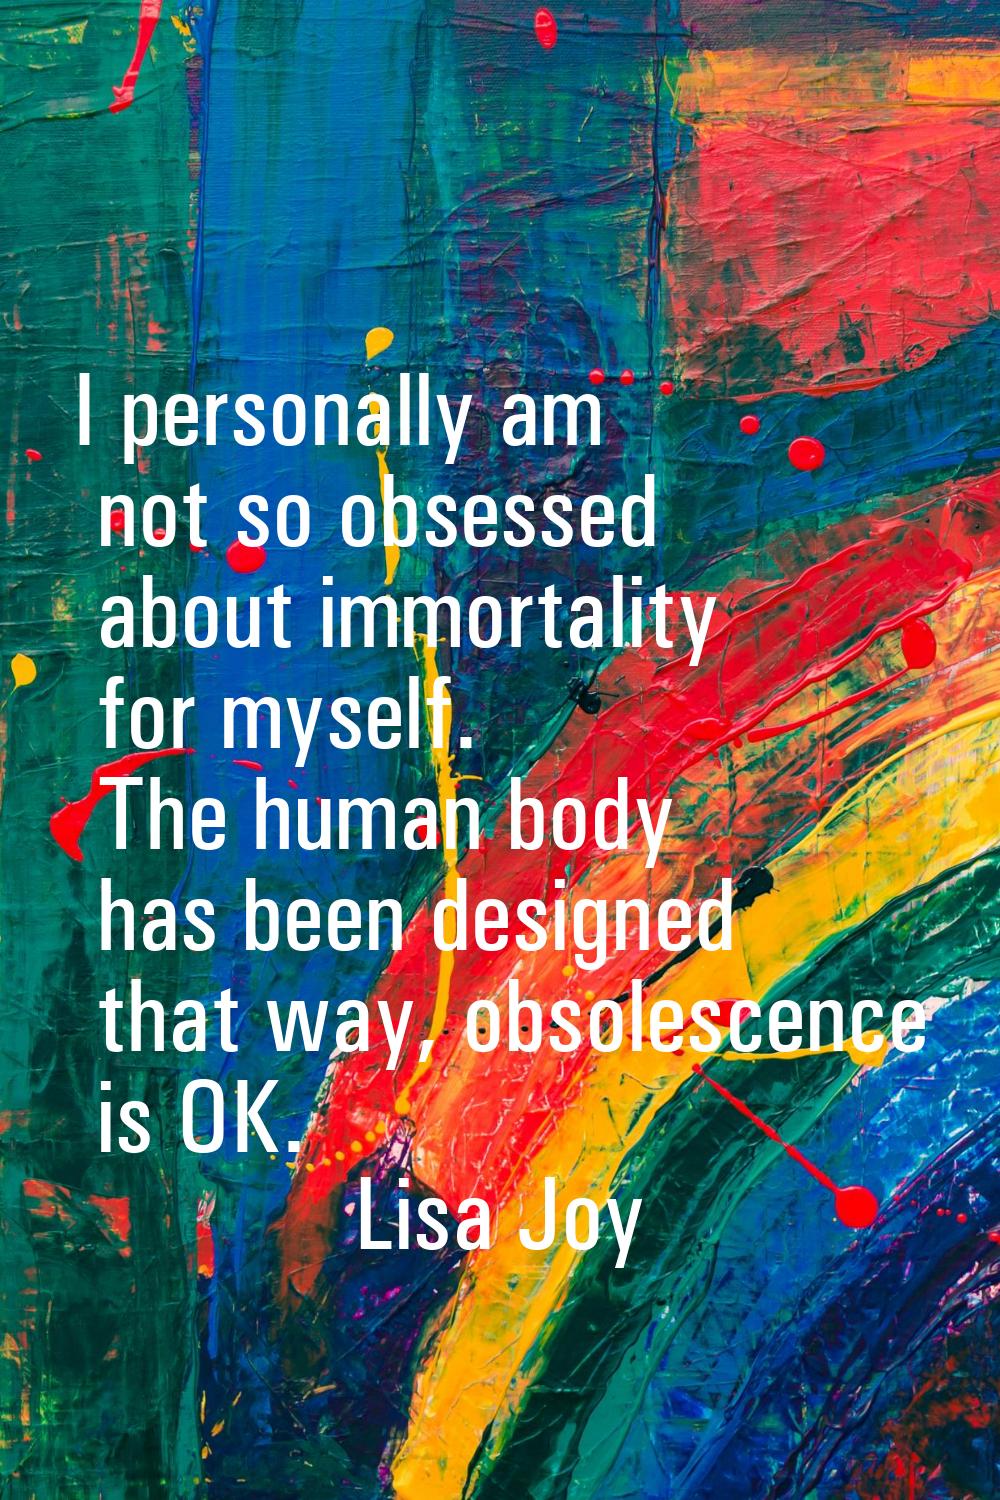 I personally am not so obsessed about immortality for myself. The human body has been designed that